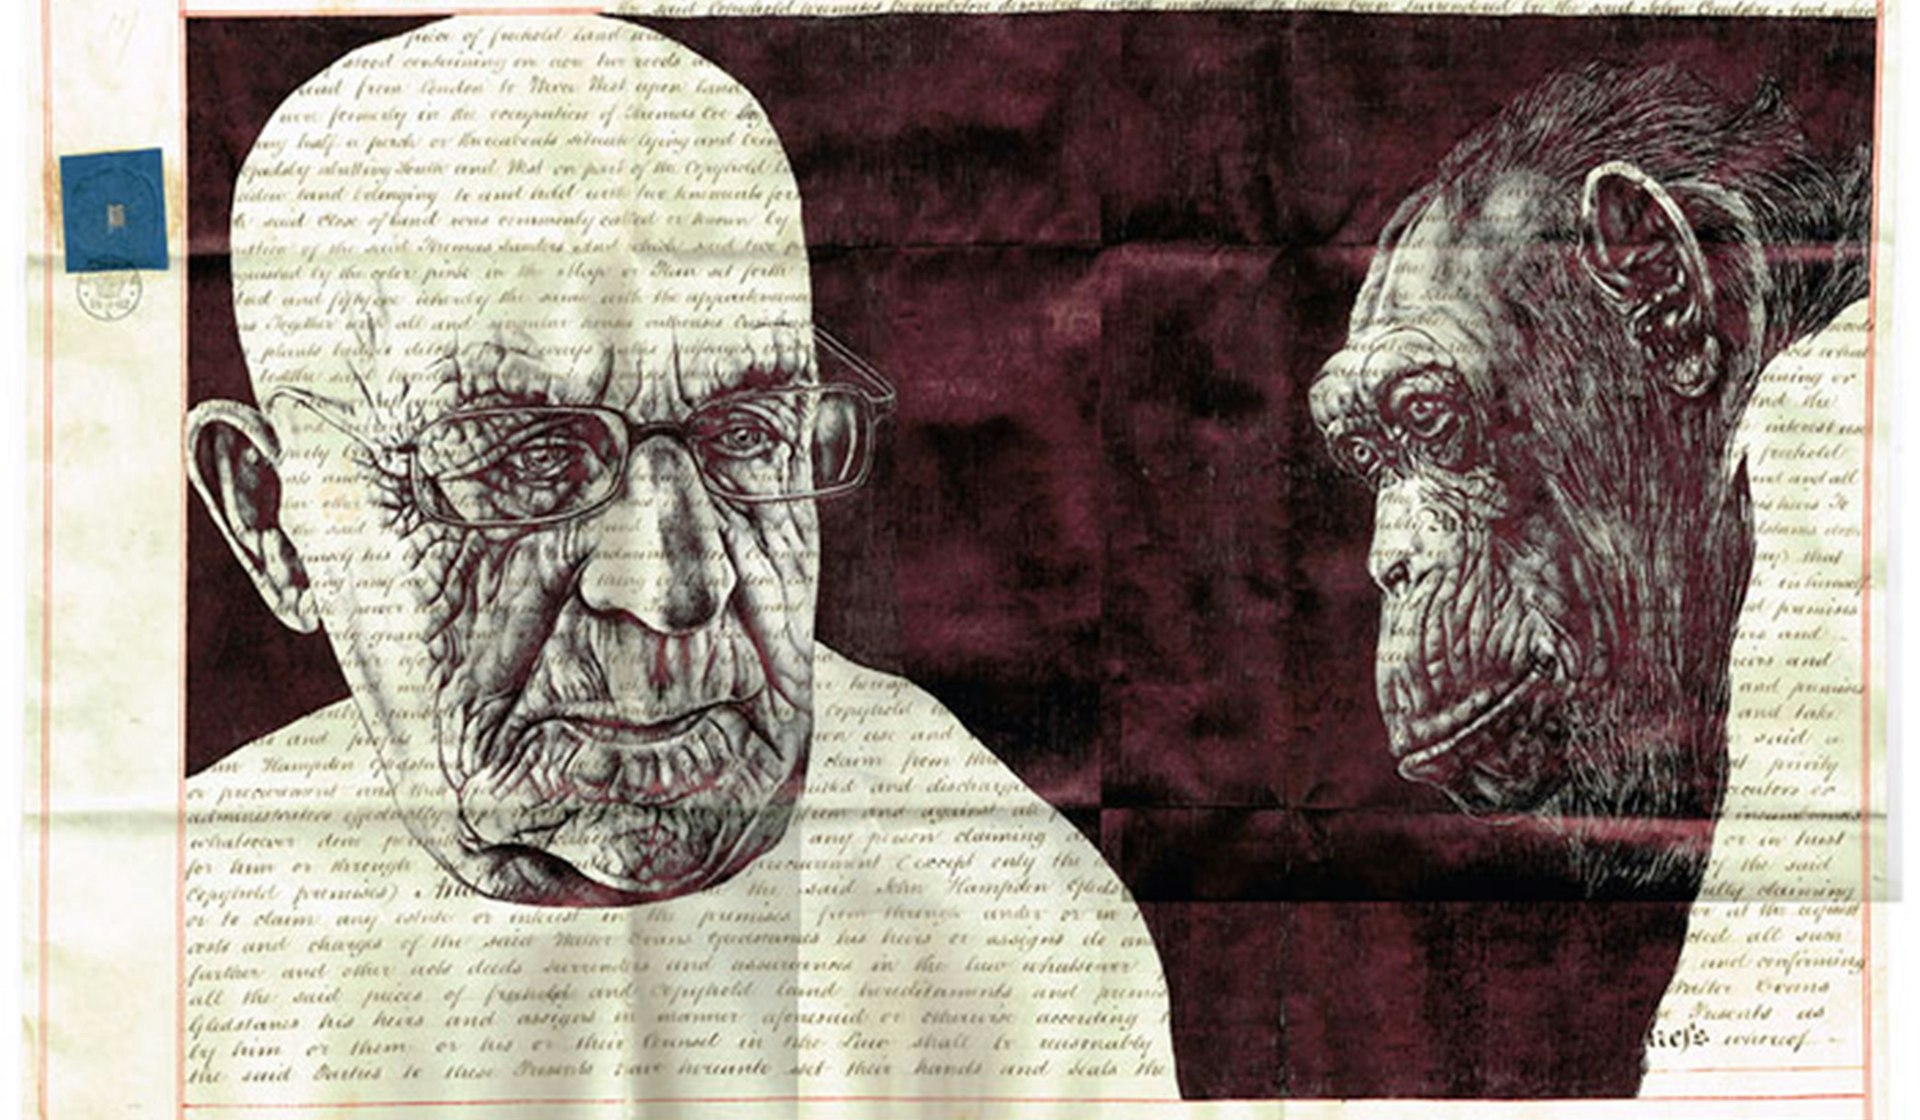 Artist Mark Powell breathes a sinister new life into antique documents